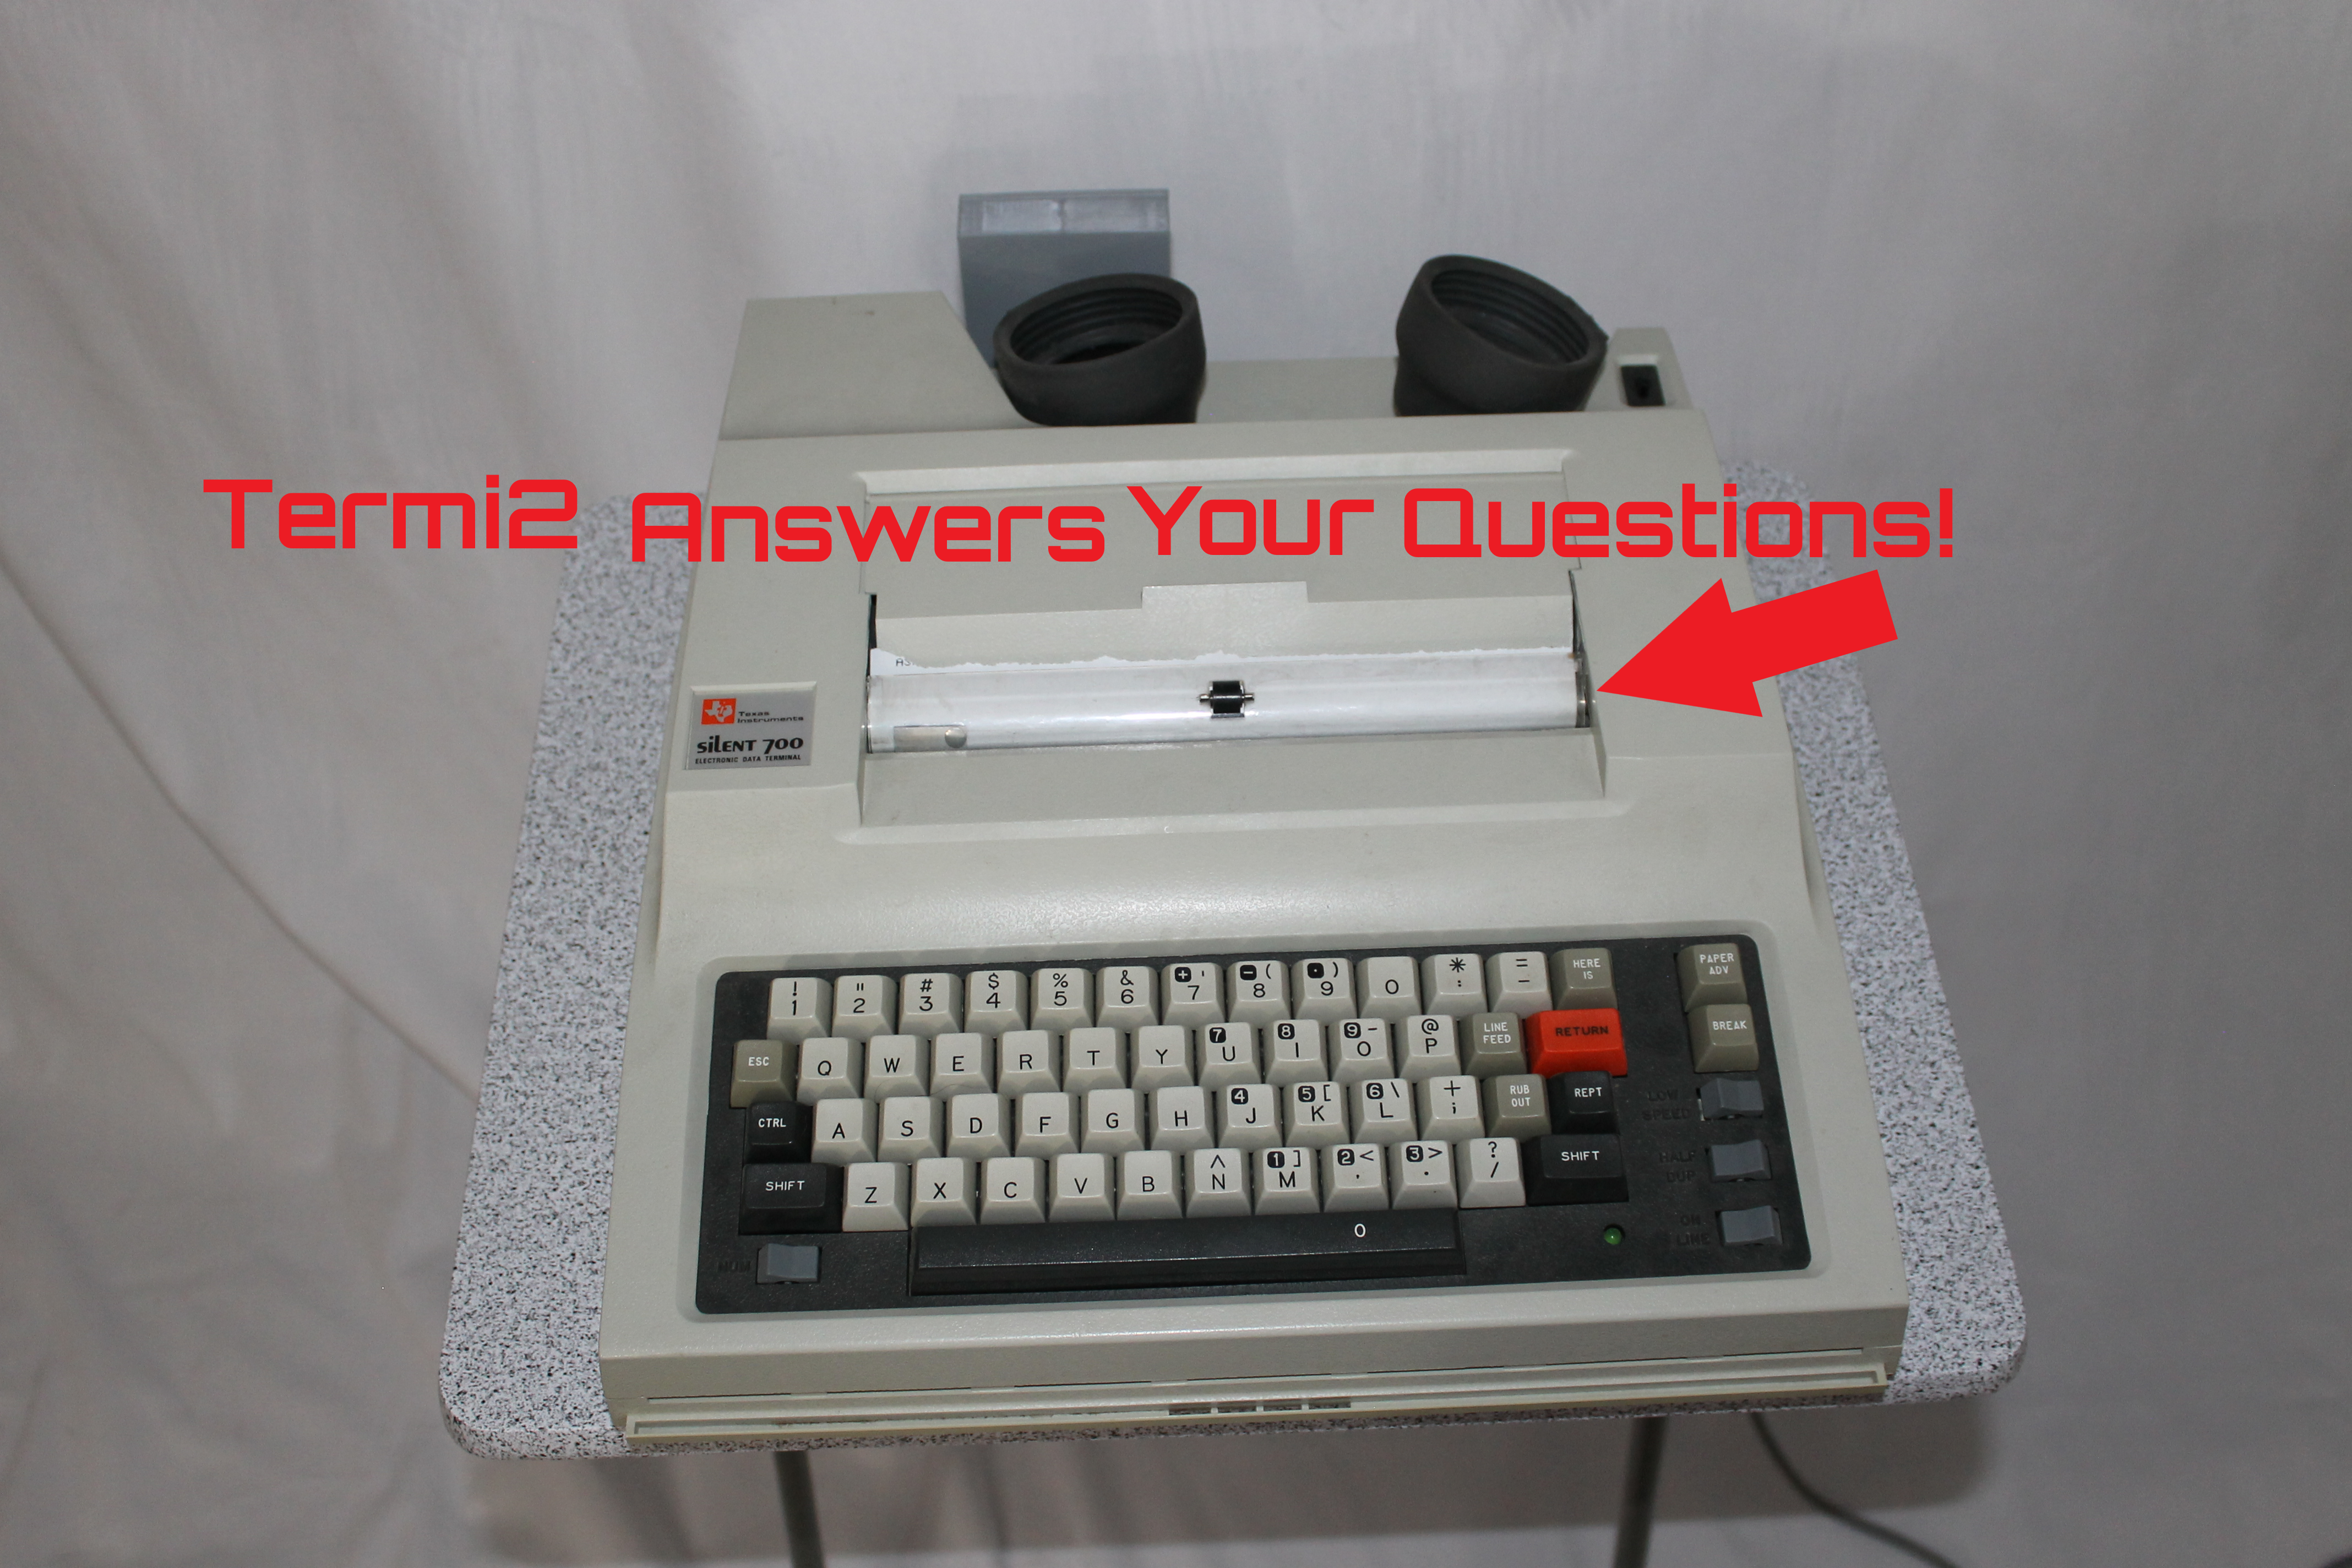 Termi2 – a Typewriter That Answers Your Questions